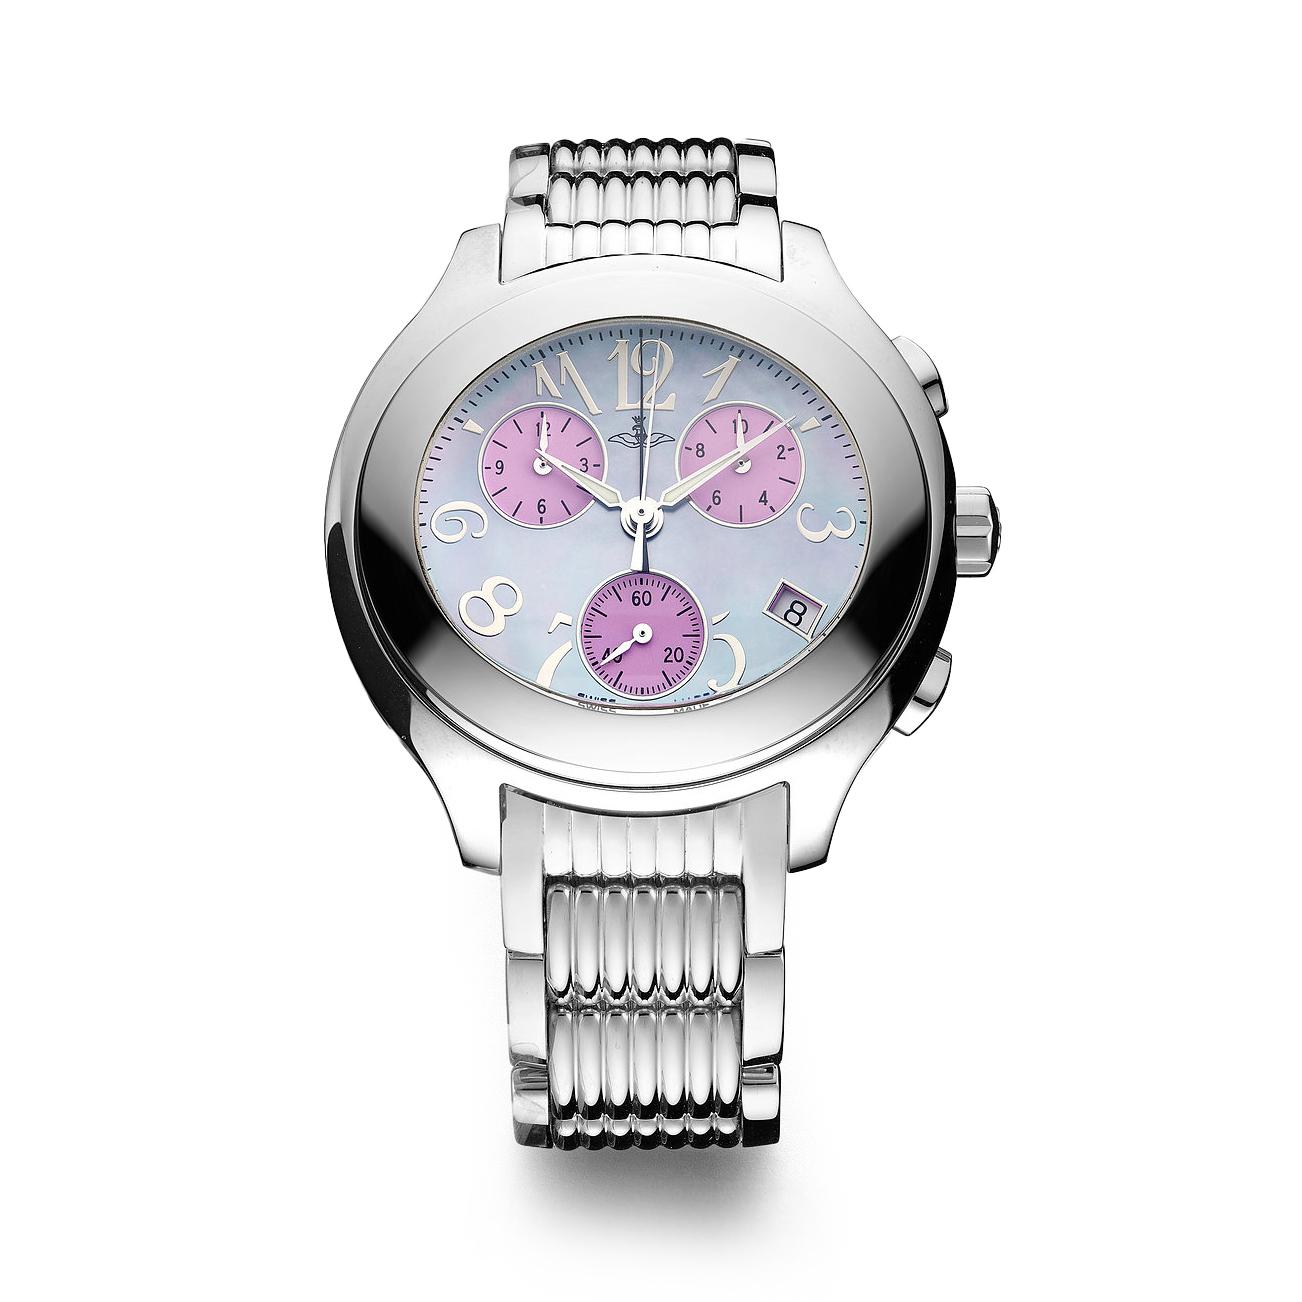 Chronograph watch in steel set with blue mother of pearl dial steel bracelet quartz movement.